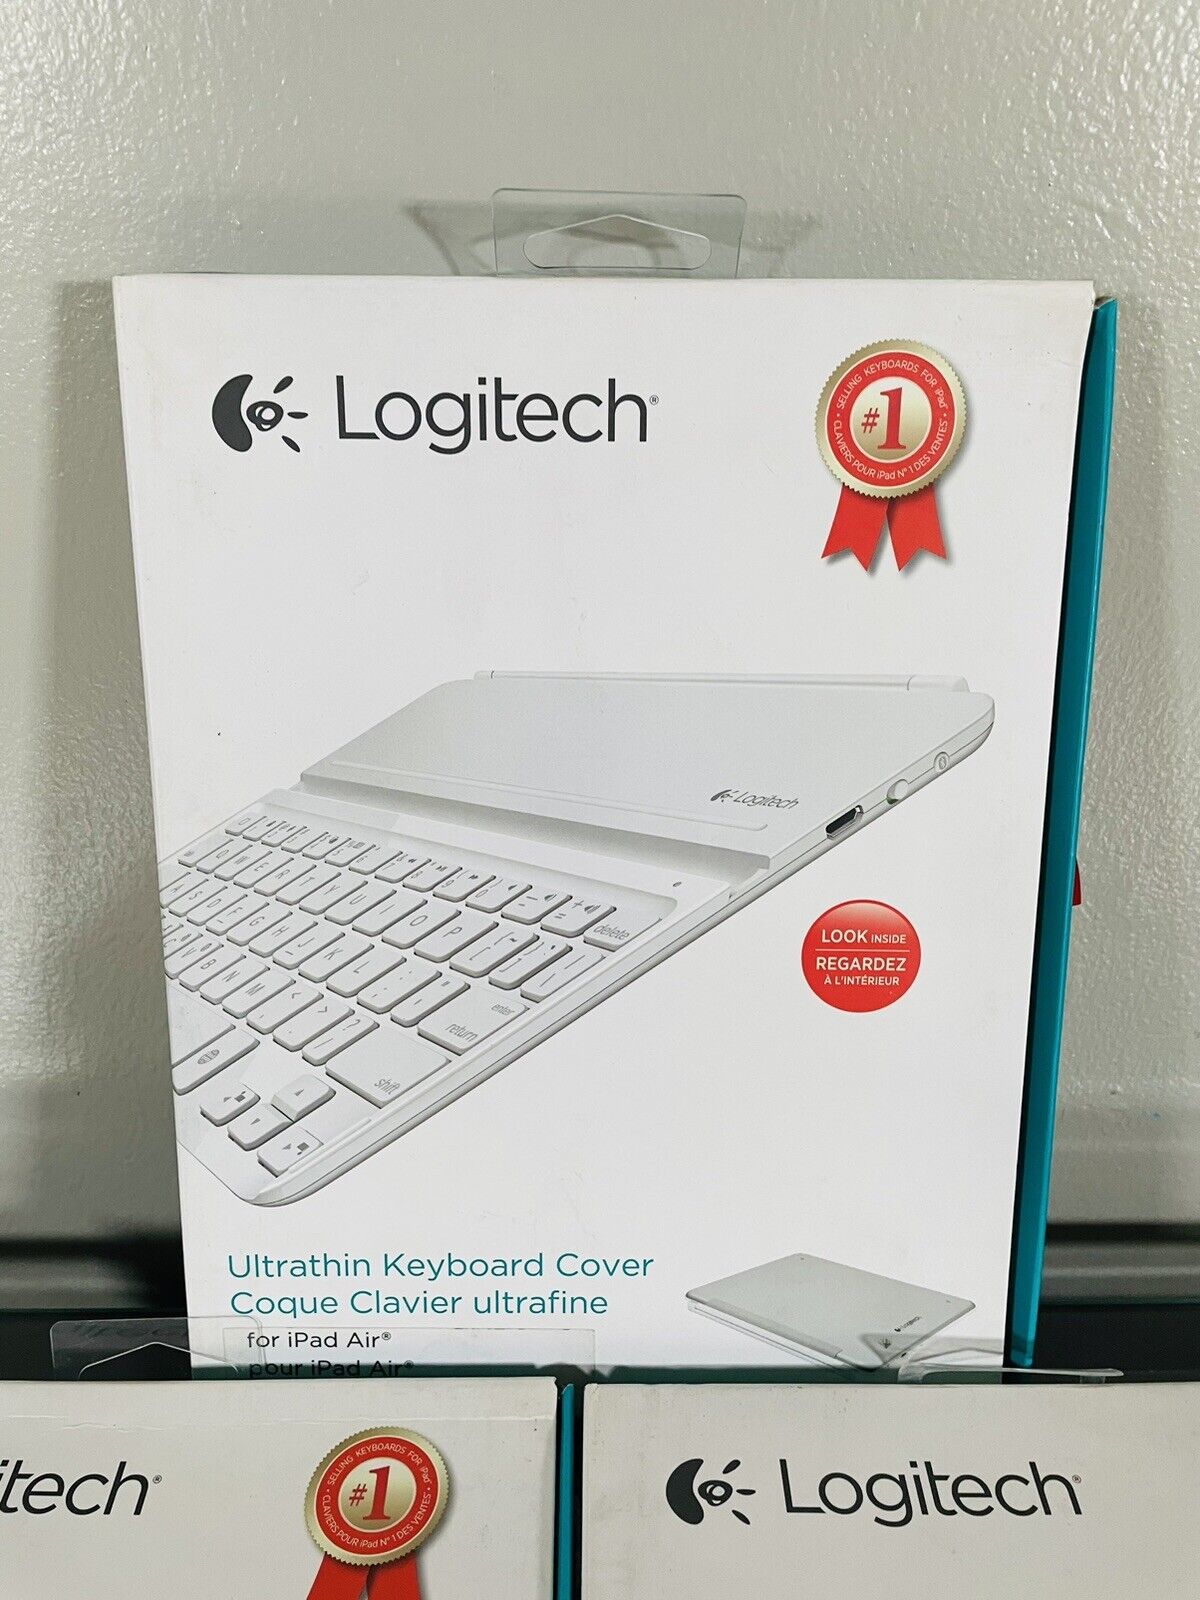 New Logitech Wireless Bluetooth Ultrathin Keyboard Cover for iPad Air - White